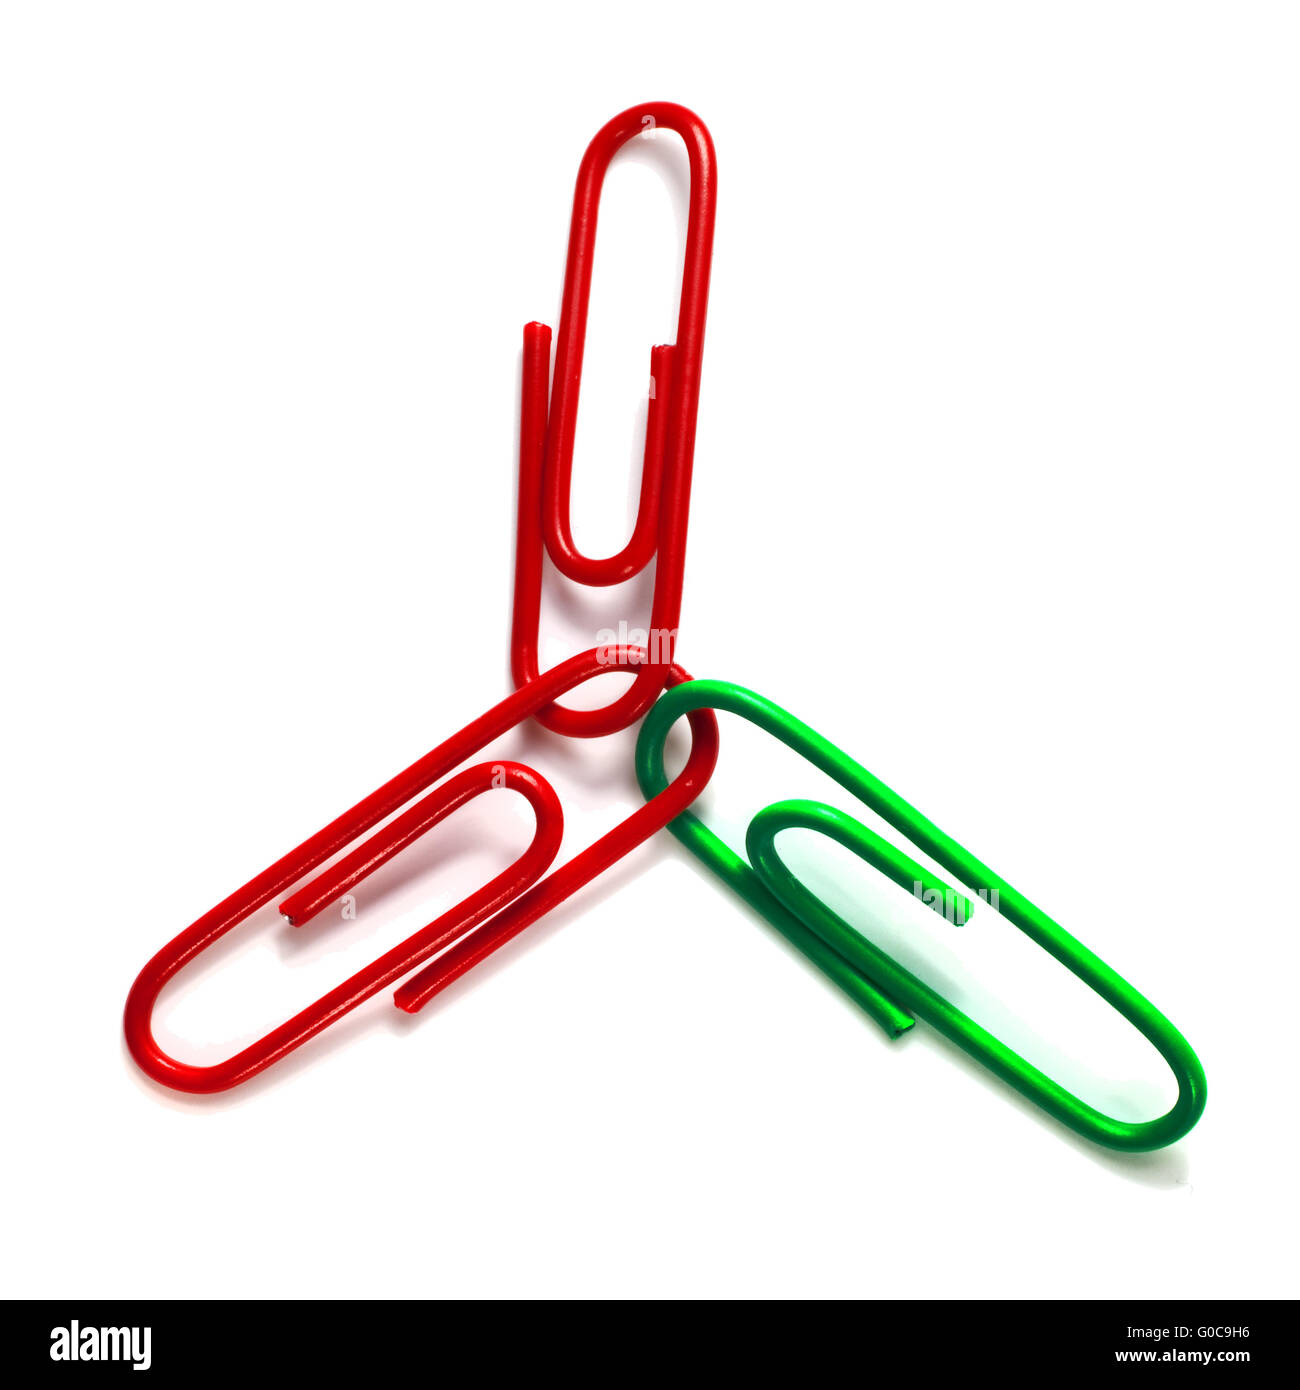 Red, red and green paper clips, symbolic image Stock Photo